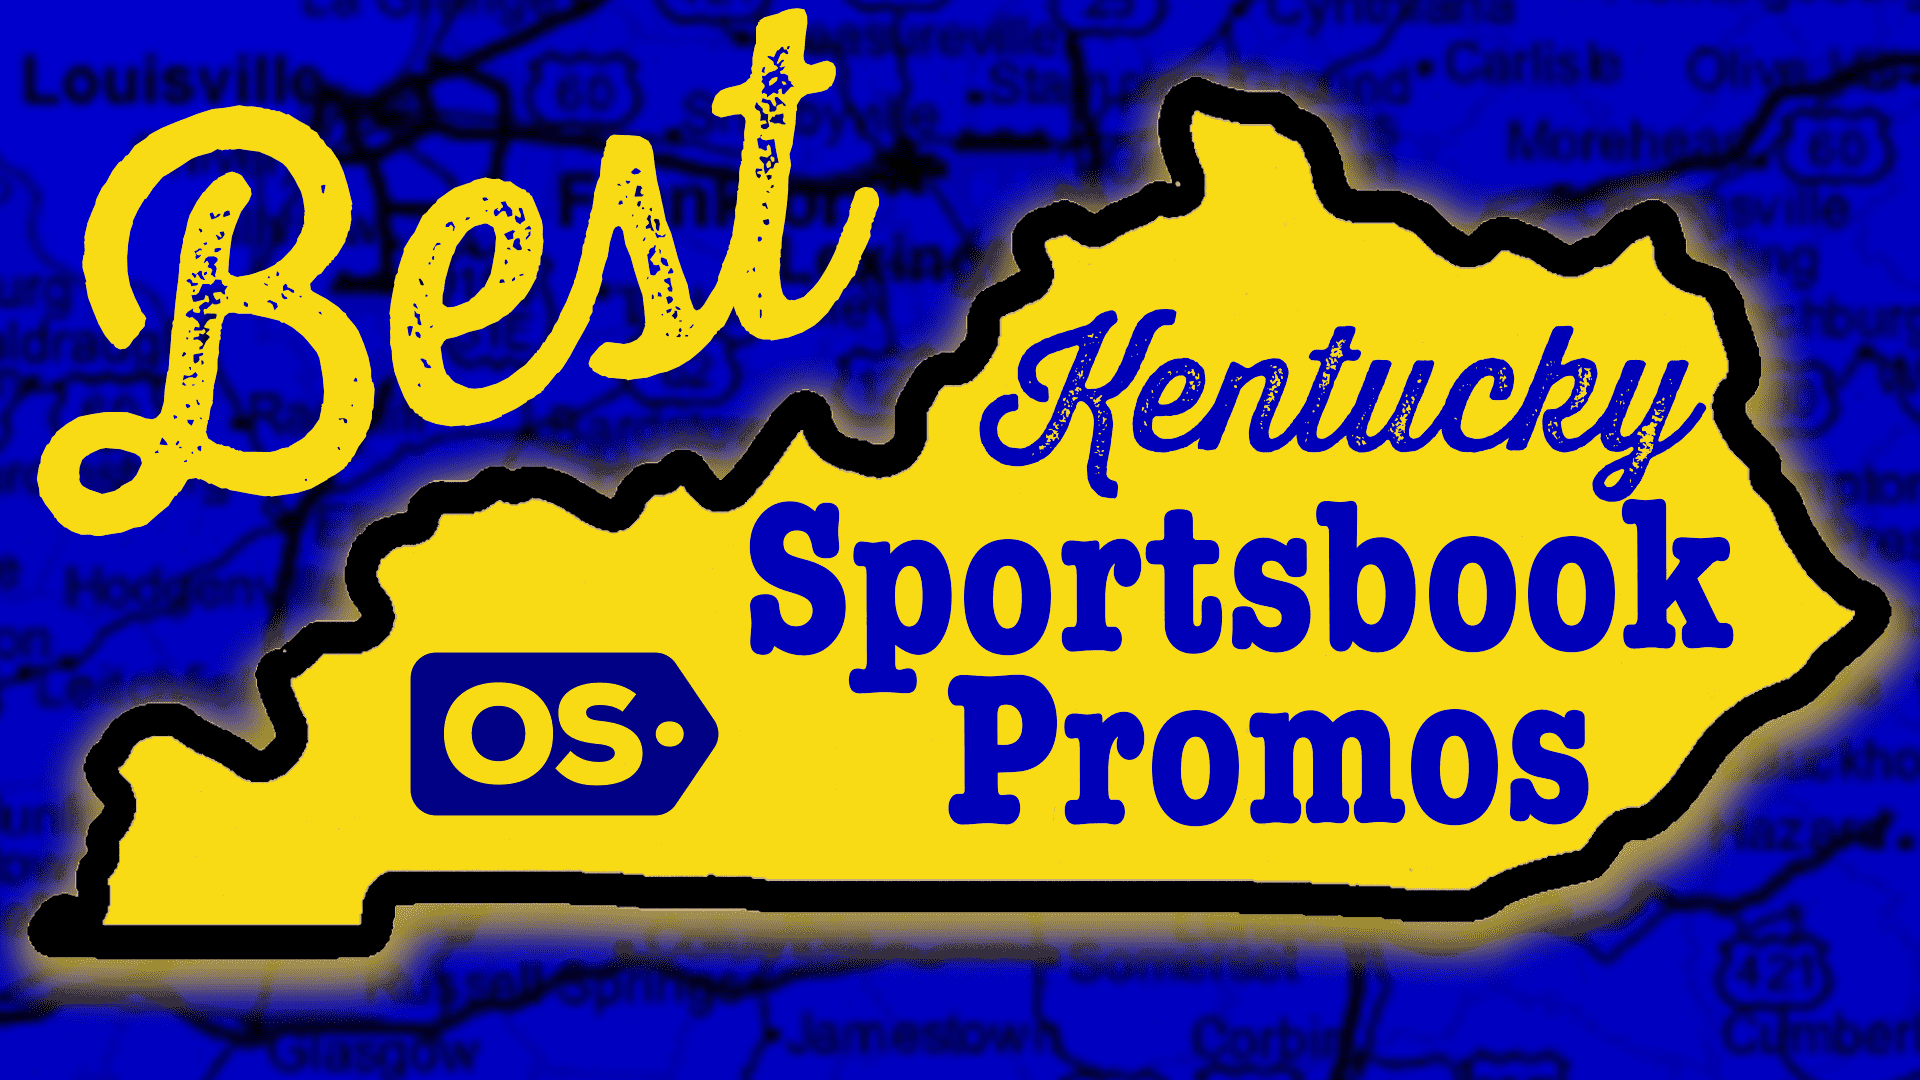 Kentucky Sports Betting Promo Codes: Best Welcome Offers & Bonus Bets for Online Sportsbook Launch